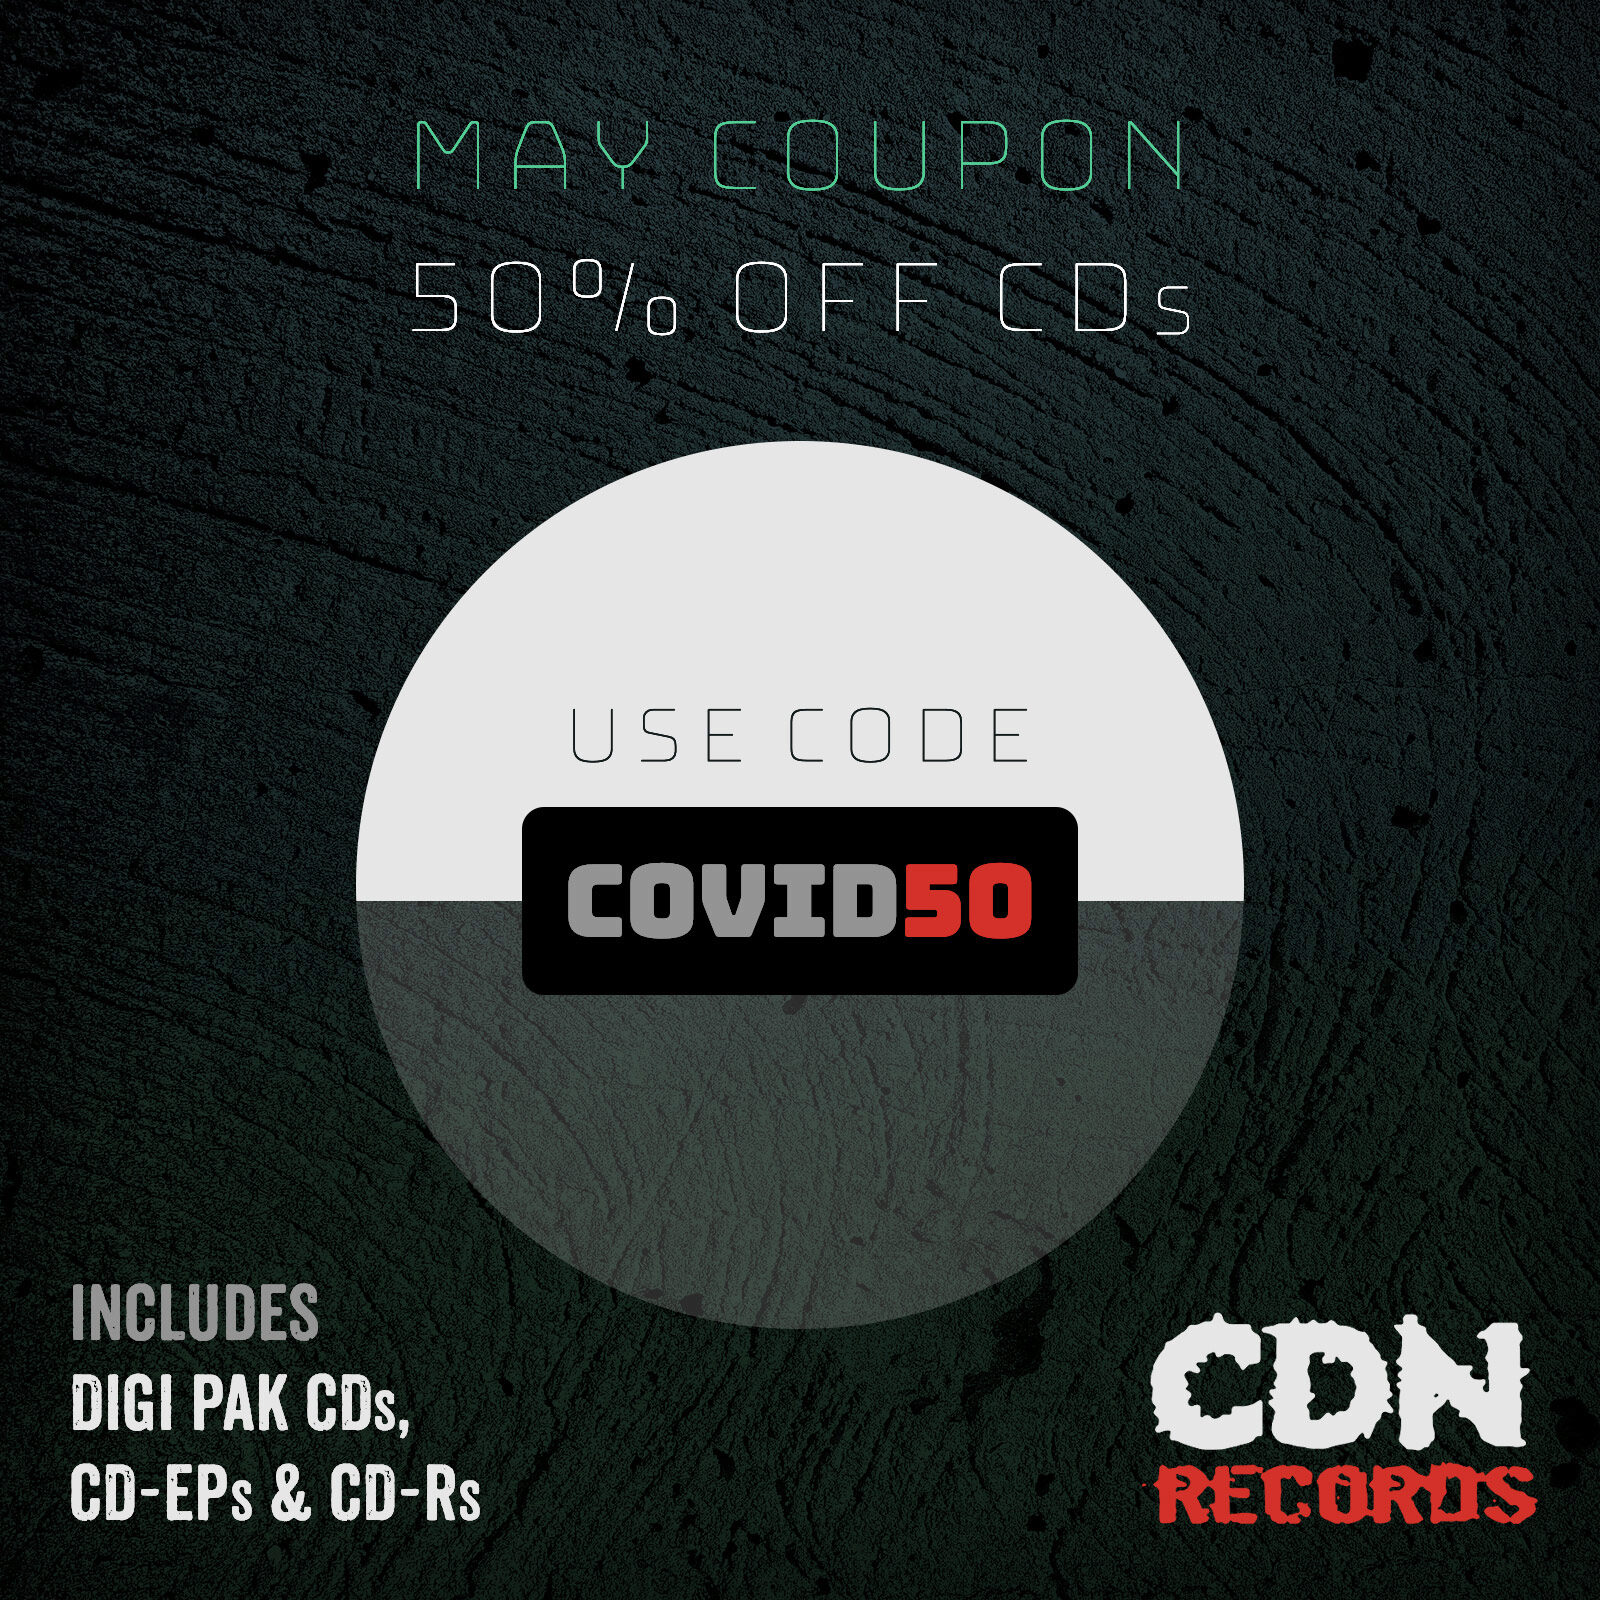 Promo graphic for COVID50 coupon